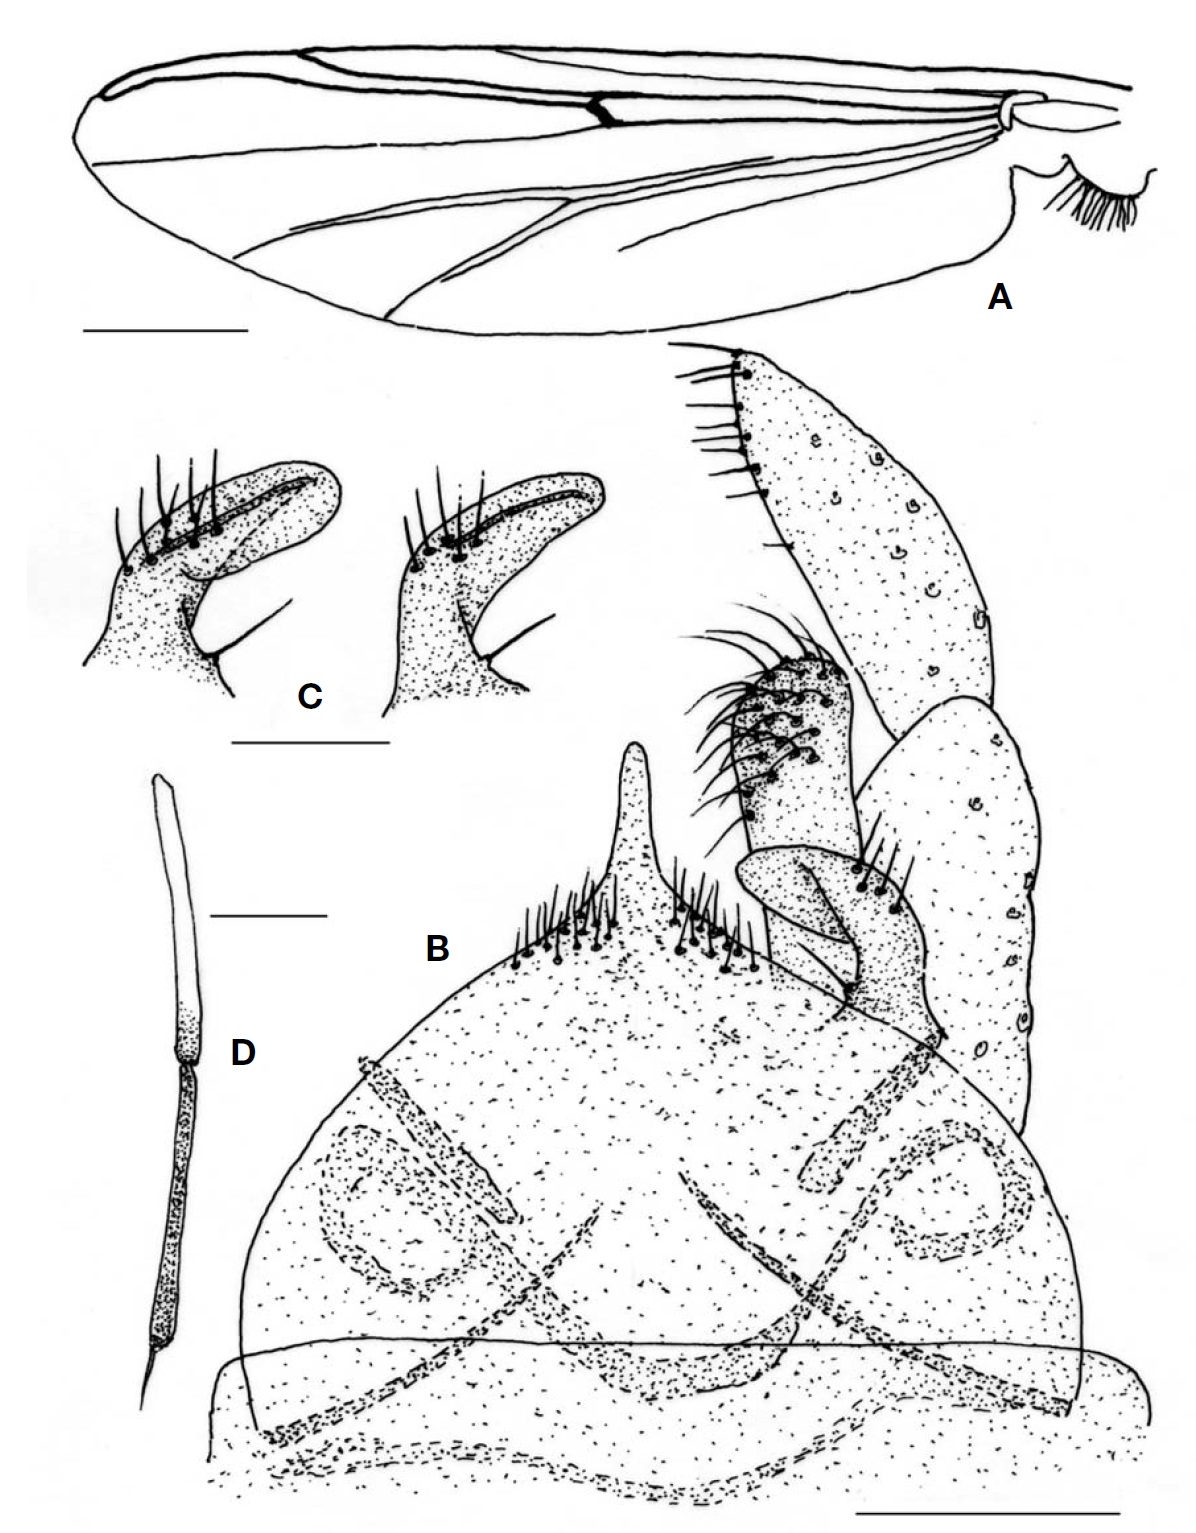 Microtendipes paratamagouti sp. nov. (male). A, Wing; B, Hypopygium; C, Variation of superior volsella; D, Fore femur and
tibia. Scale bars: A, D=0.5 mm, B=0.1 μm, C=0.05 μm.